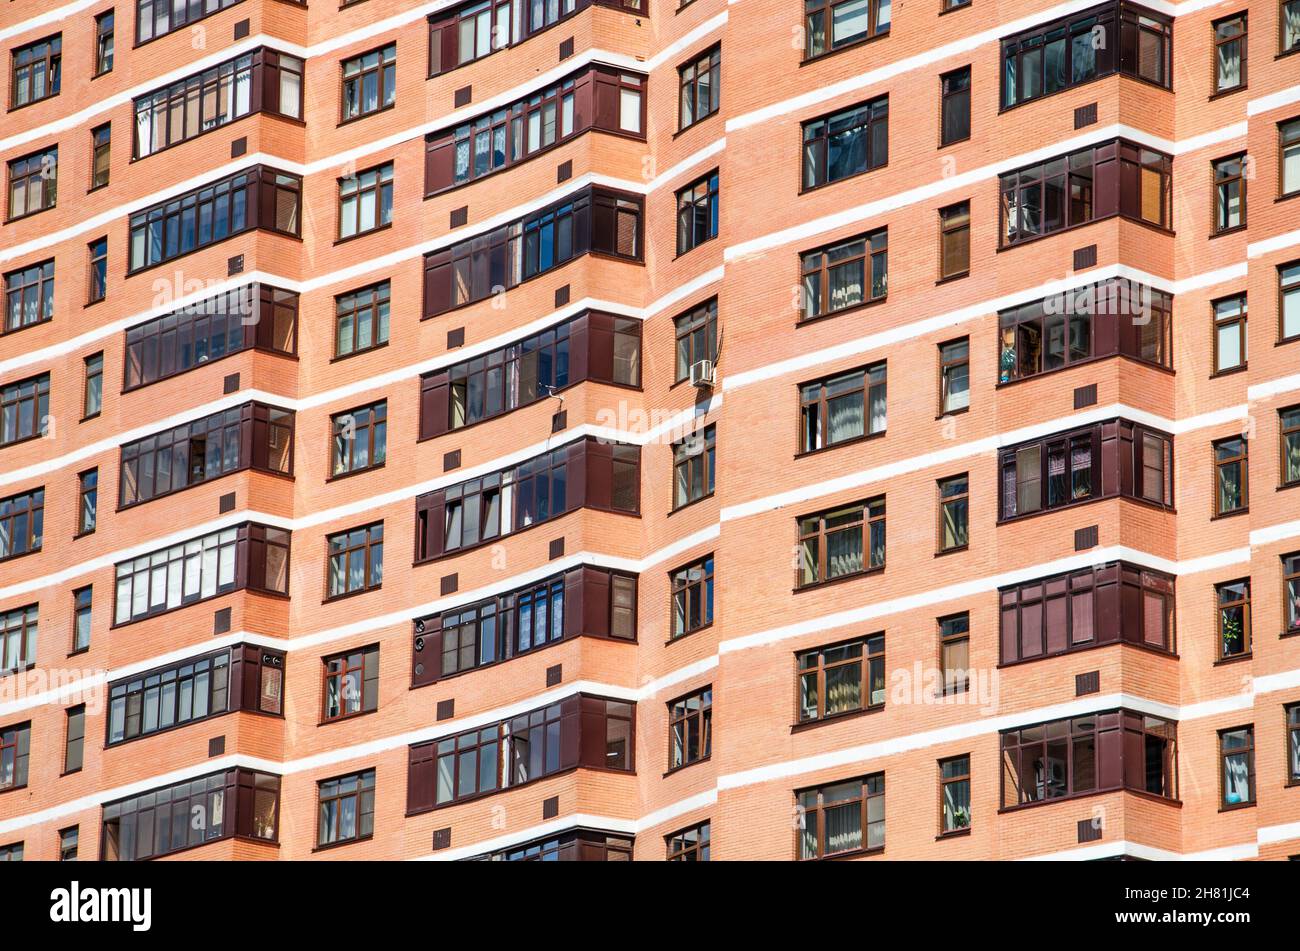 View of brick wall red contemporary apartment building with windows and balconies closeup Stock Photo